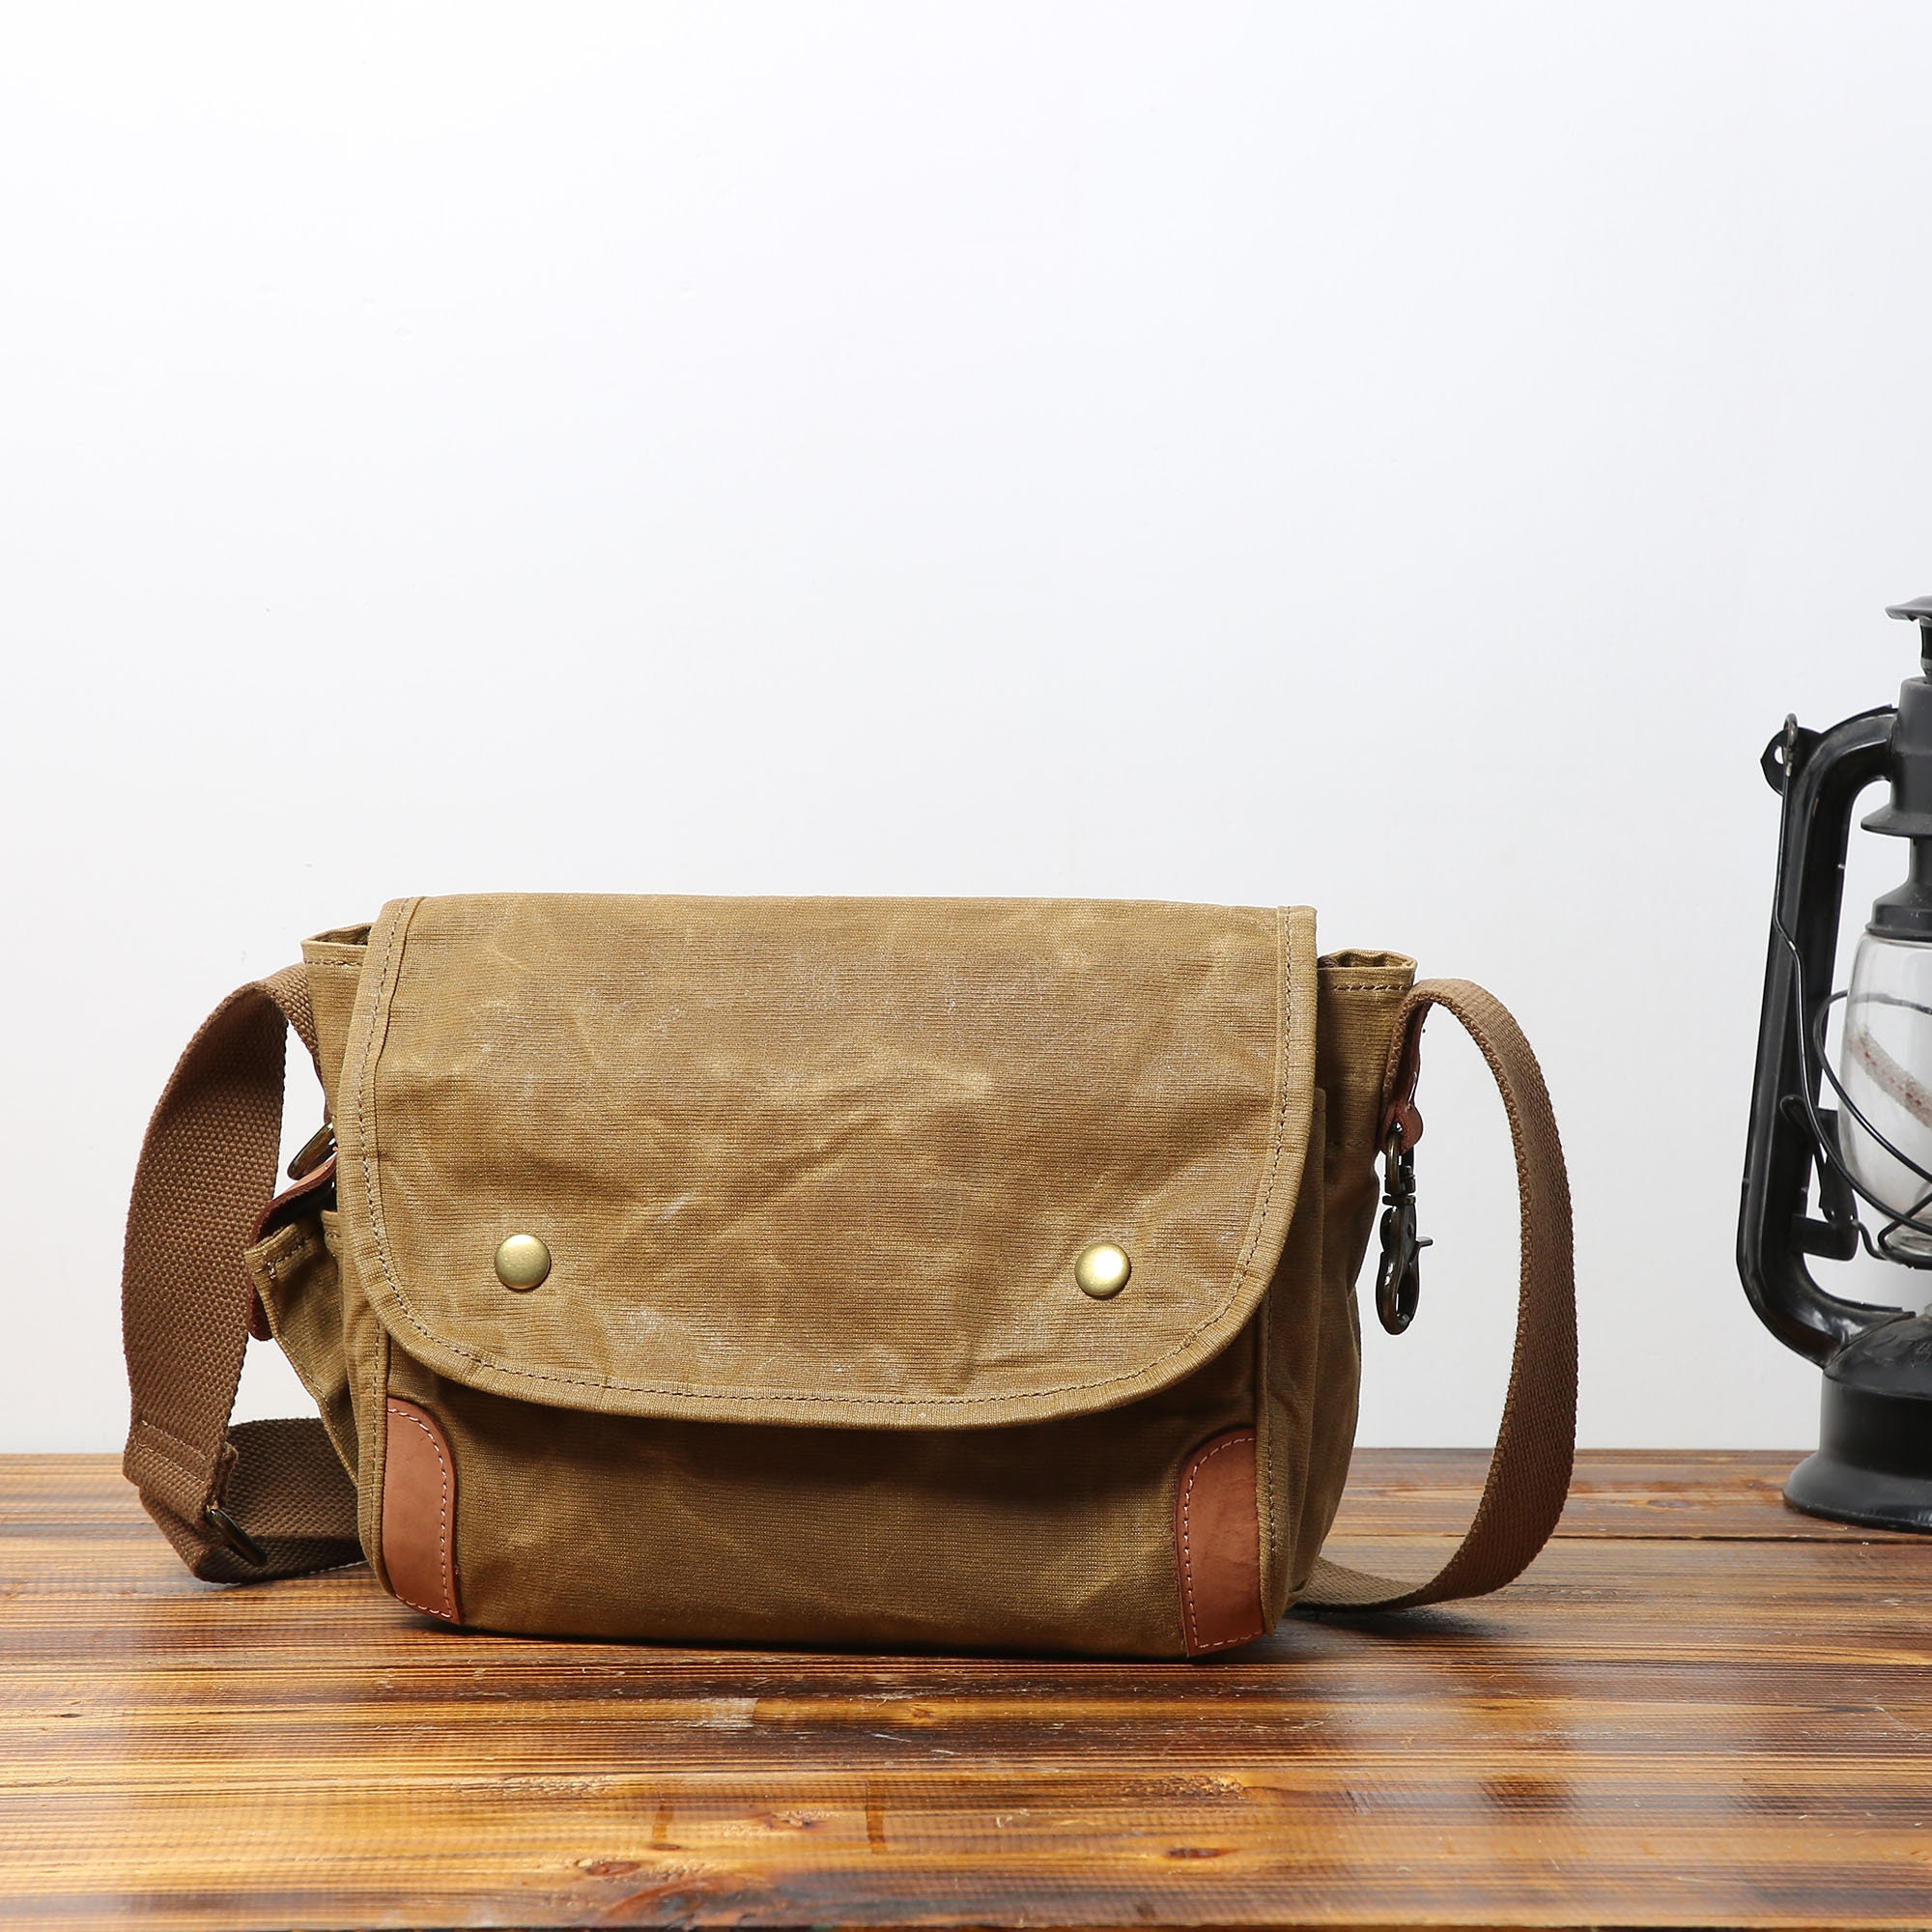 The Stanton Heavy Grade Waxed Canvas Messenger Large Laptop Bag